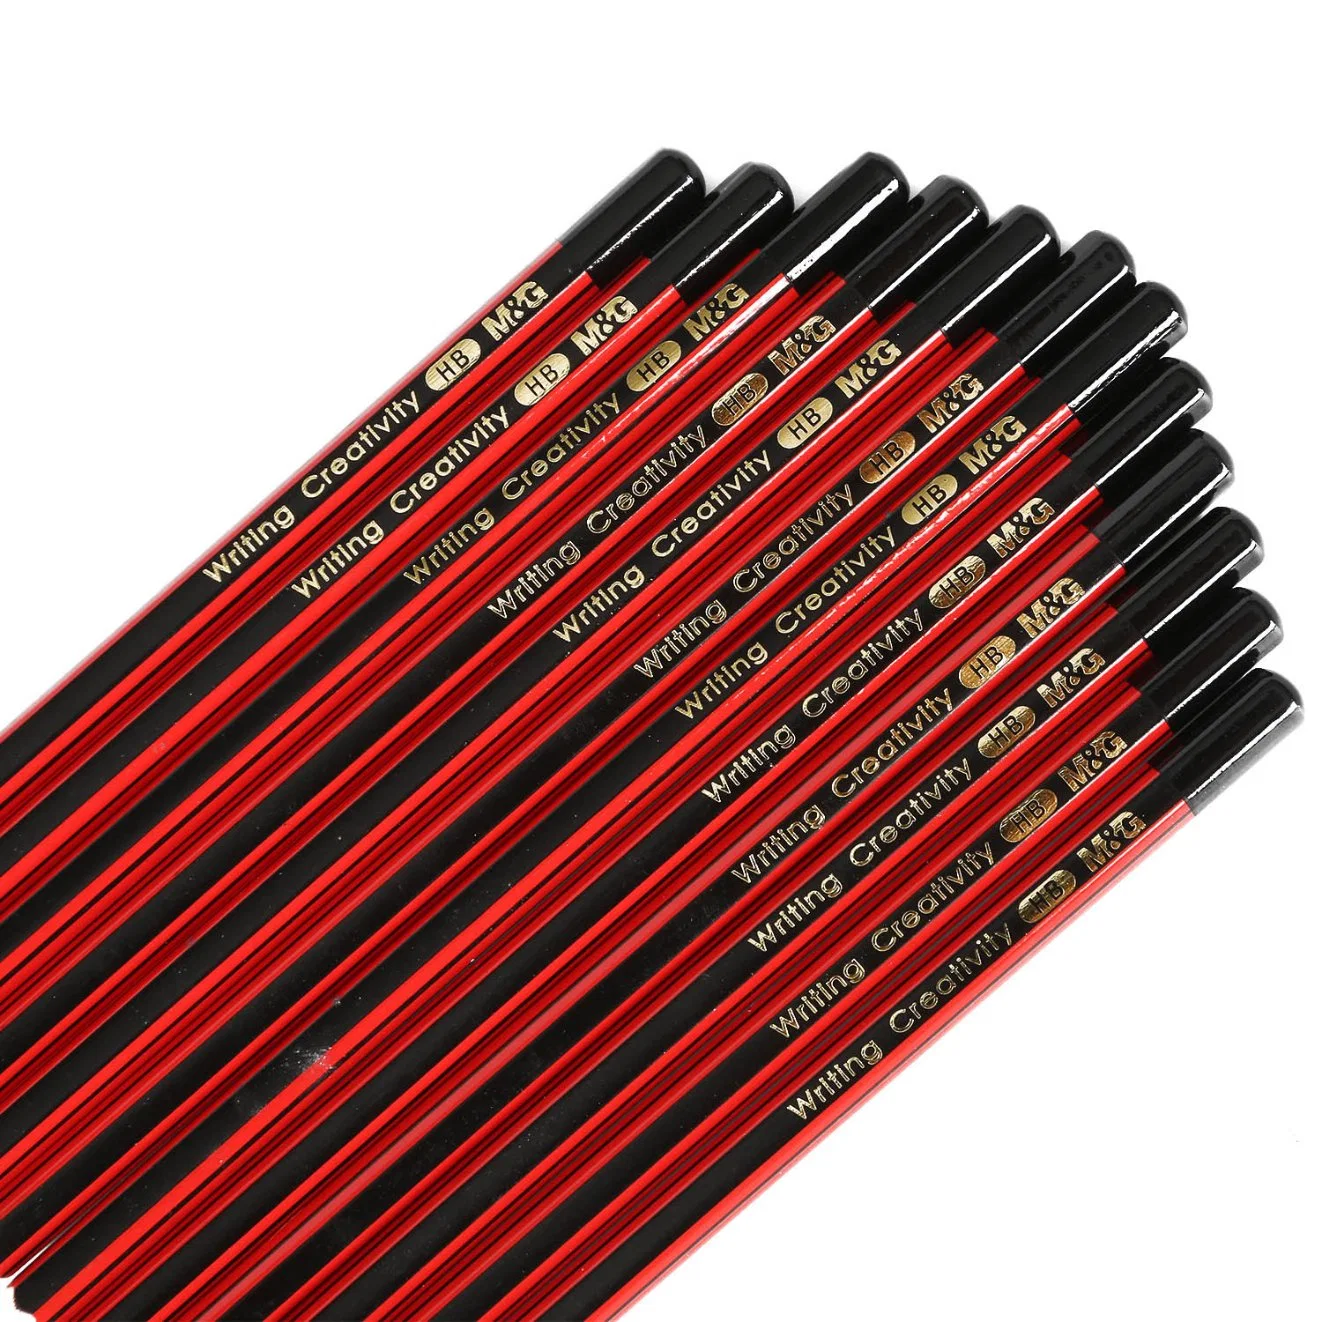 Standard Custom Logo Wooden Black and Red Hb Pencil Without Eraser